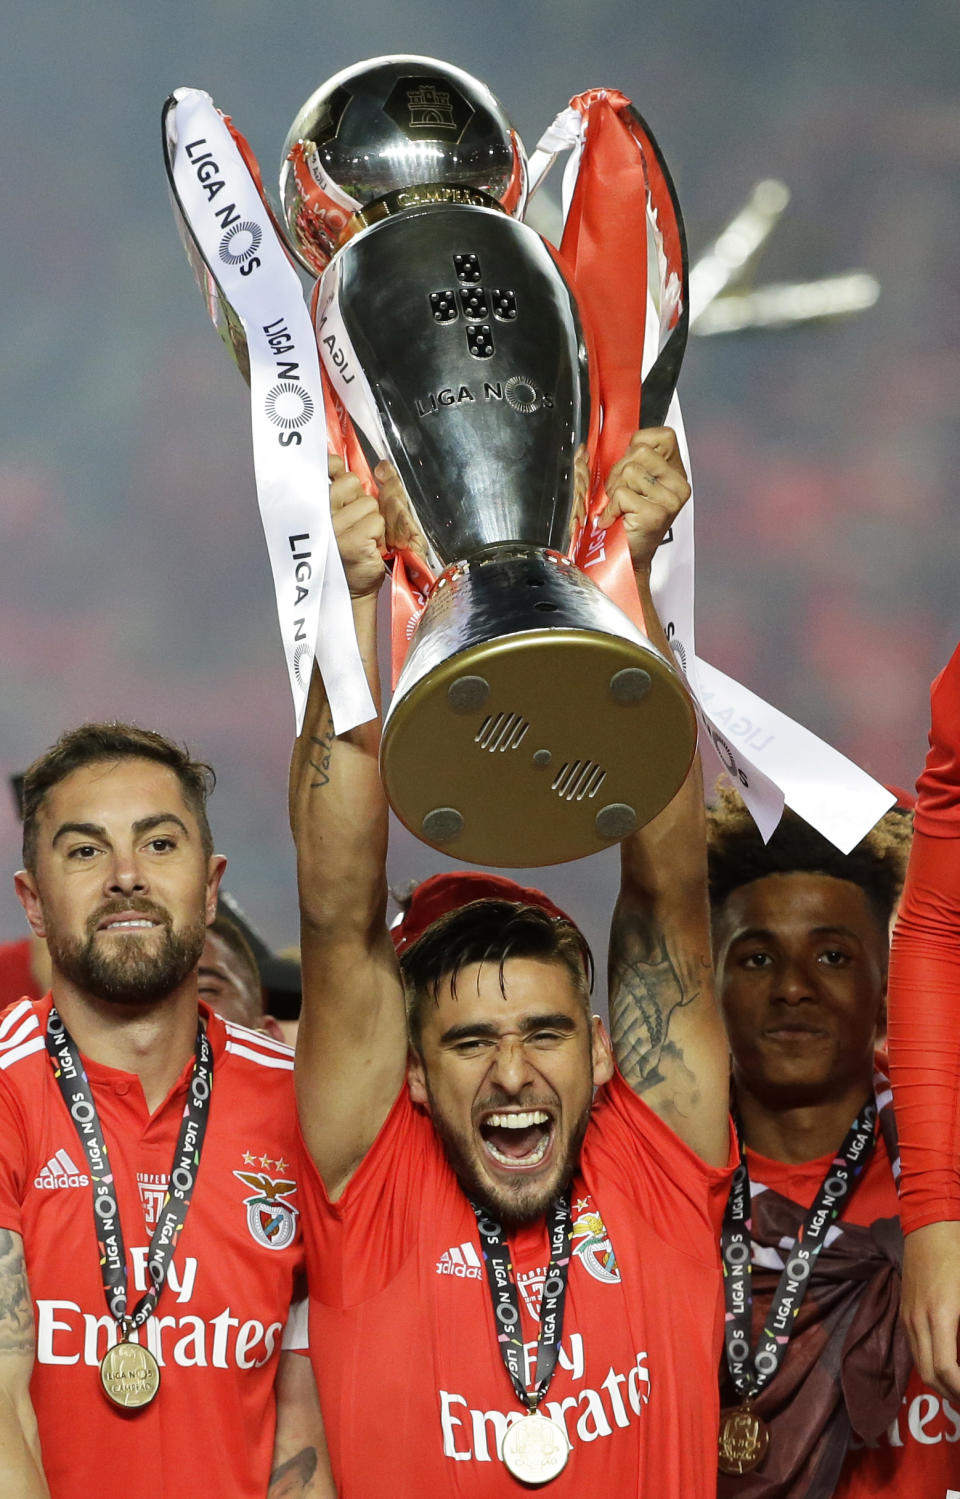 Benfica's Eduardo Salvio lifts the trophy after the Portuguese league last round soccer match between Benfica and Santa Clara at the Luz stadium in Lisbon, Saturday, May 18, 2019. Benfica won 4-1 to clinch the championship title. (AP Photo/Armando Franca)